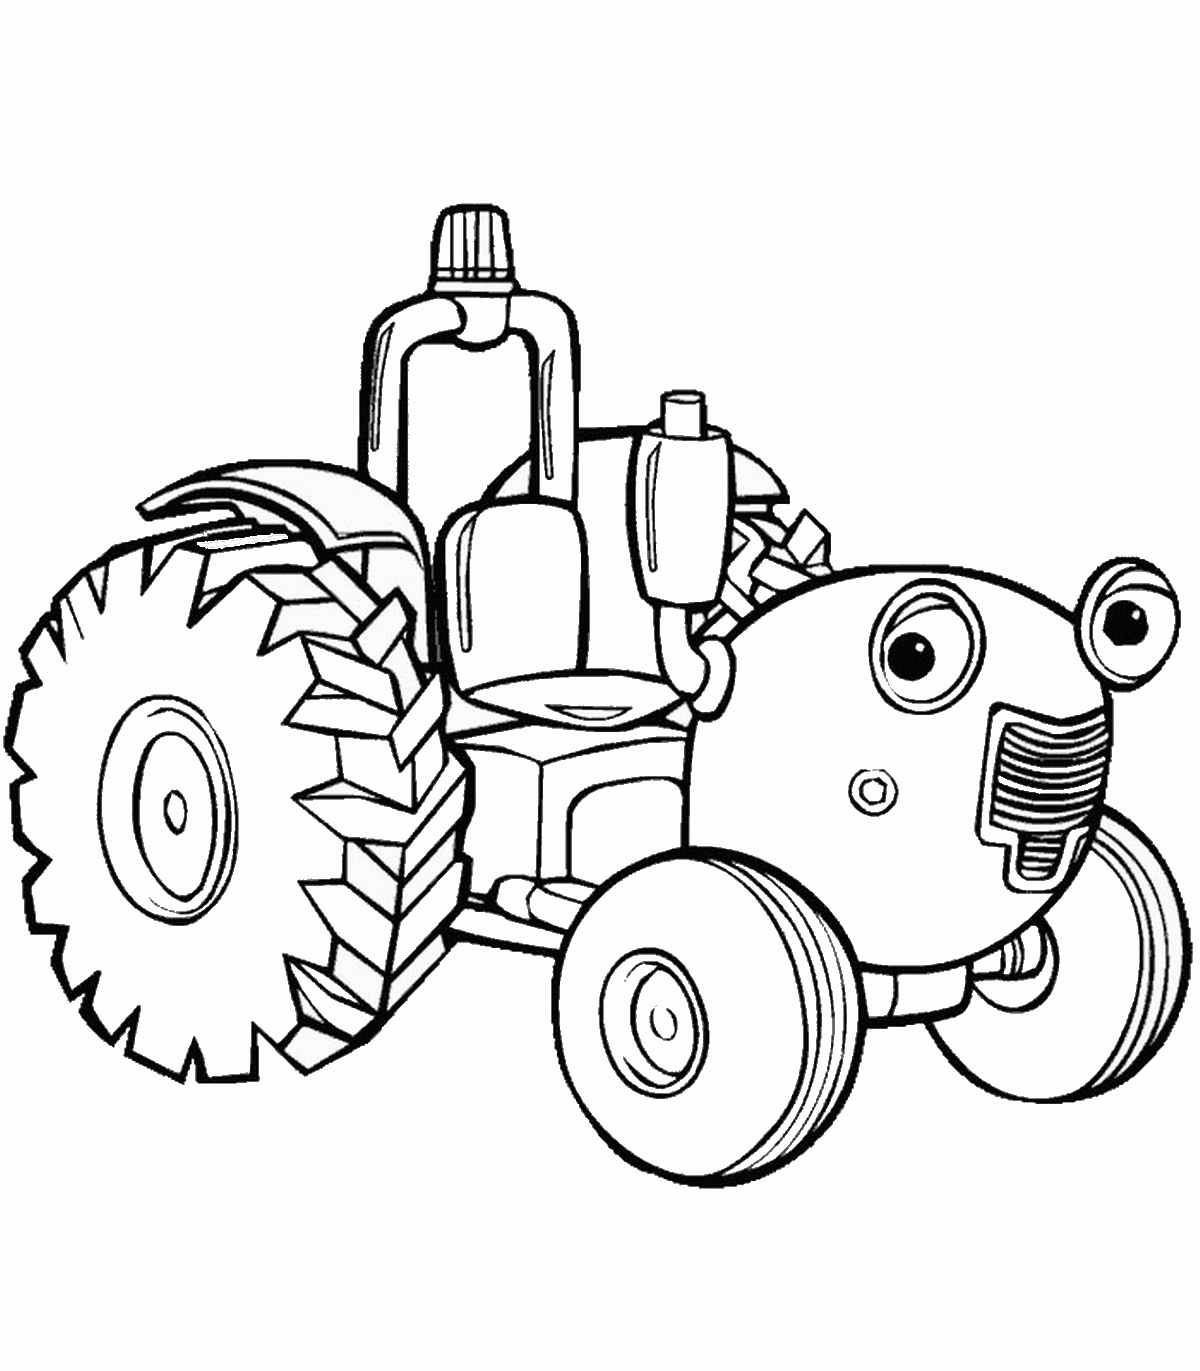 John Deere Tractor Coloring Pages for boys Printable 2020 0499 Coloring4free